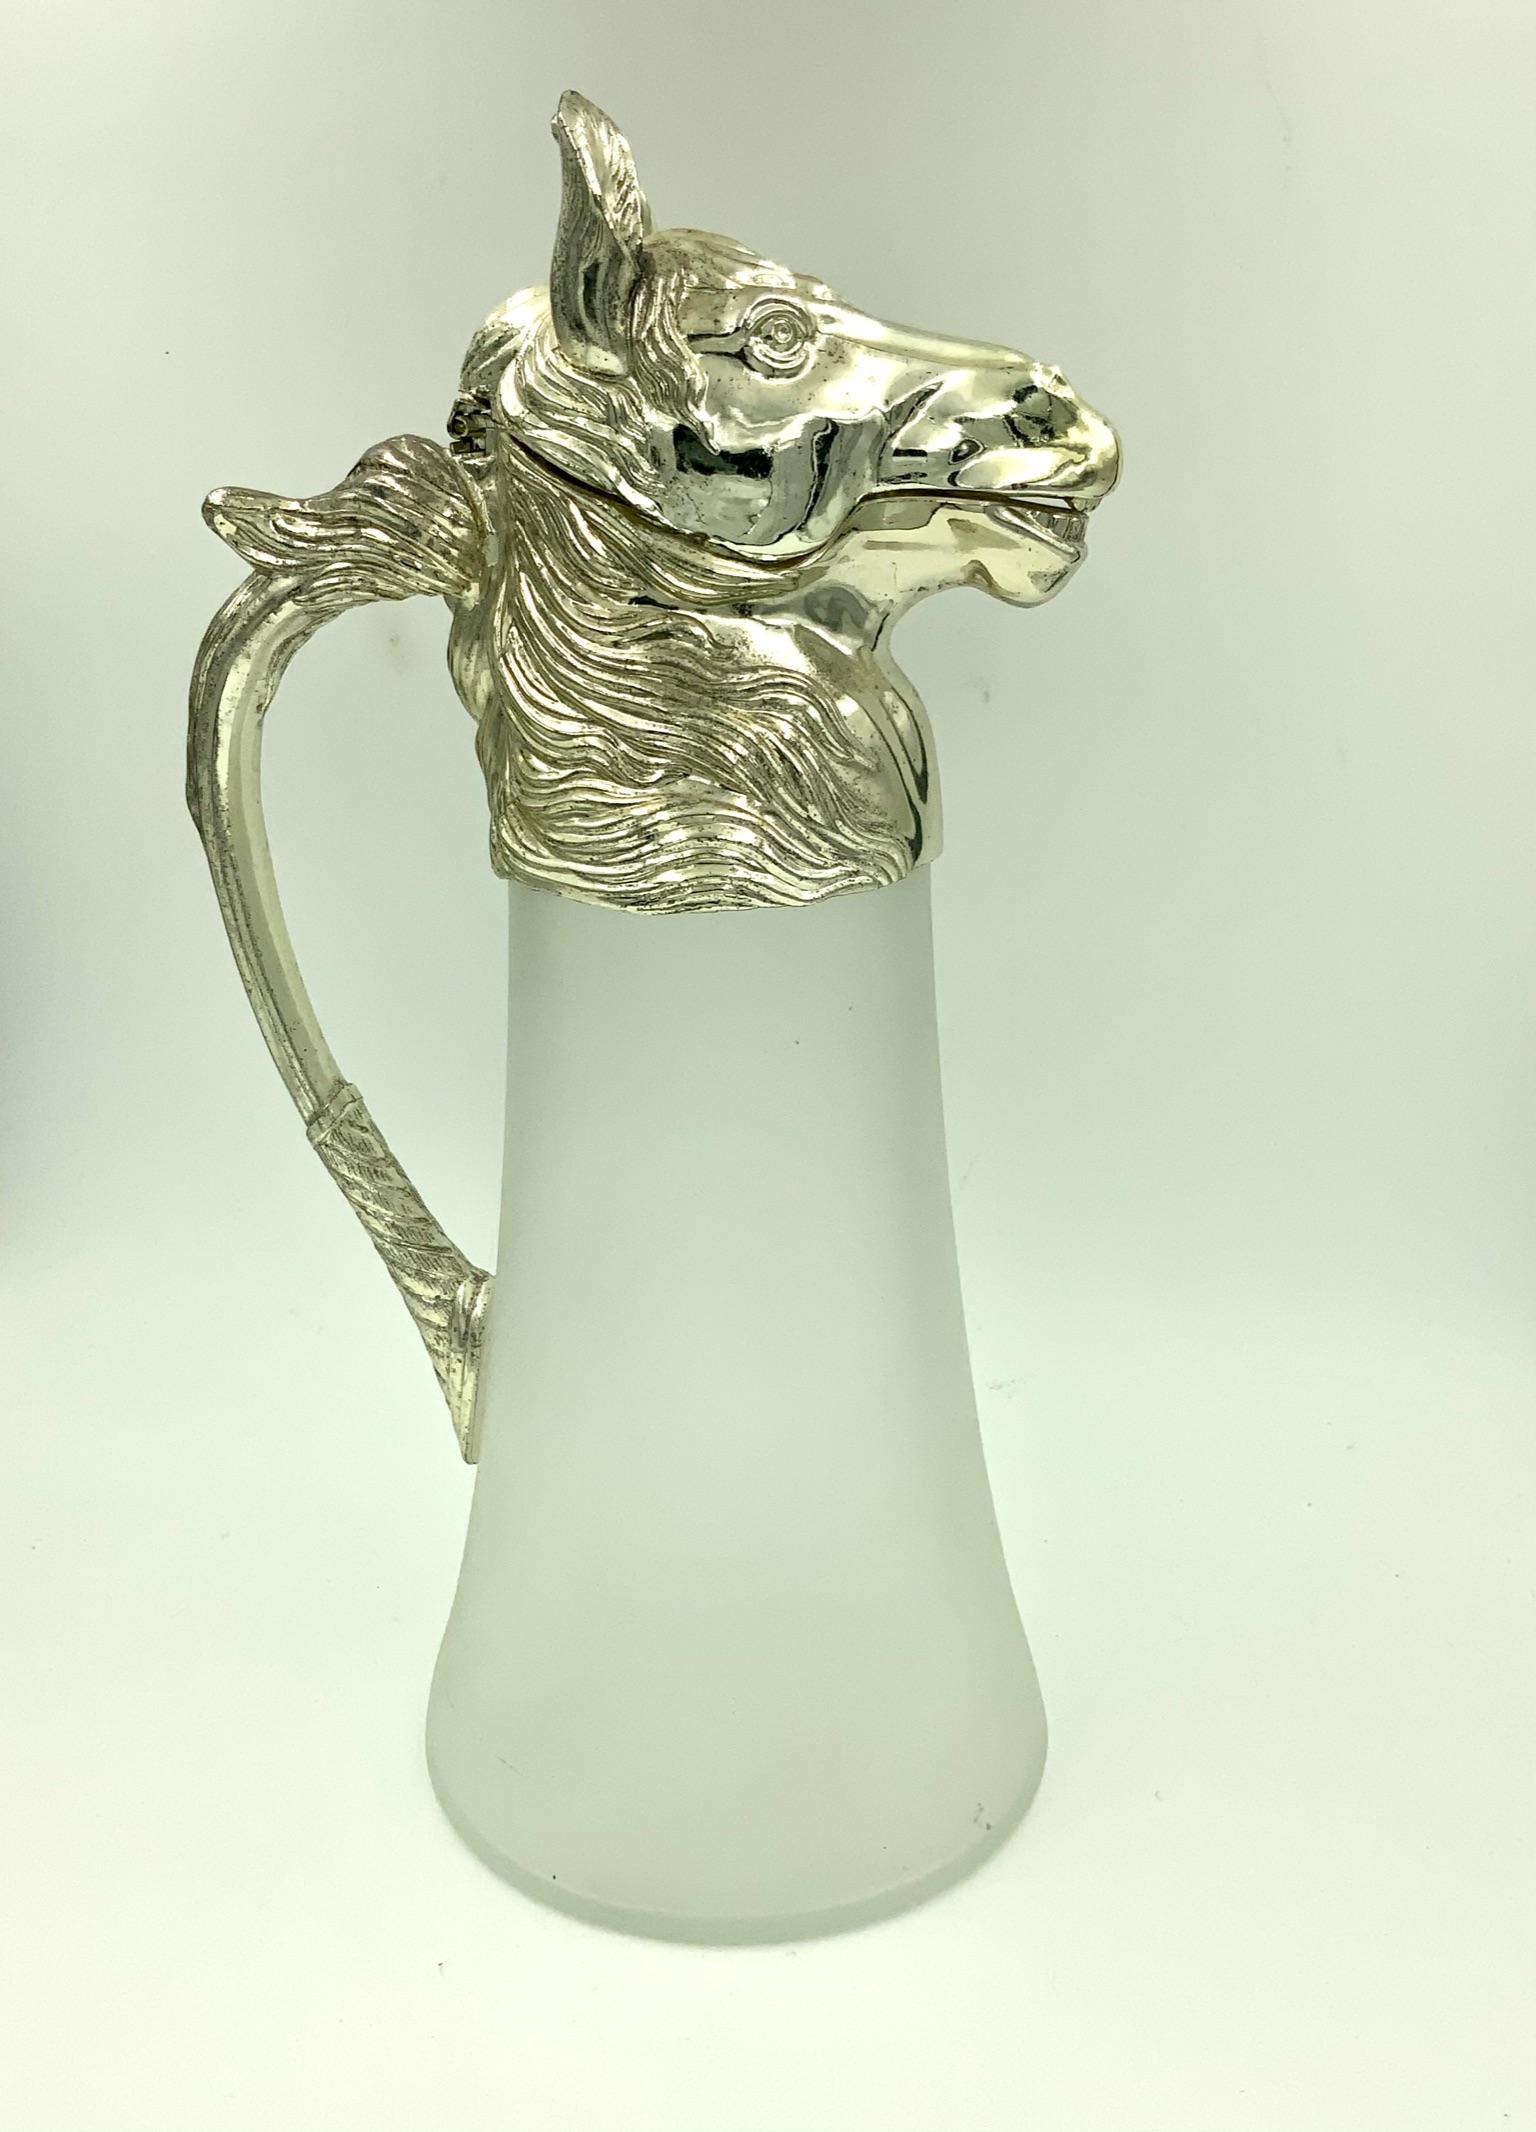 Vintage 1970s nickel silver plated horse head pitcher that opens by pulling back on the ears. The horse head and mane is mounted on a frosted glass to make a gorgeous figural decanter pitcher. Part of the original sticker is still on the bottom - it